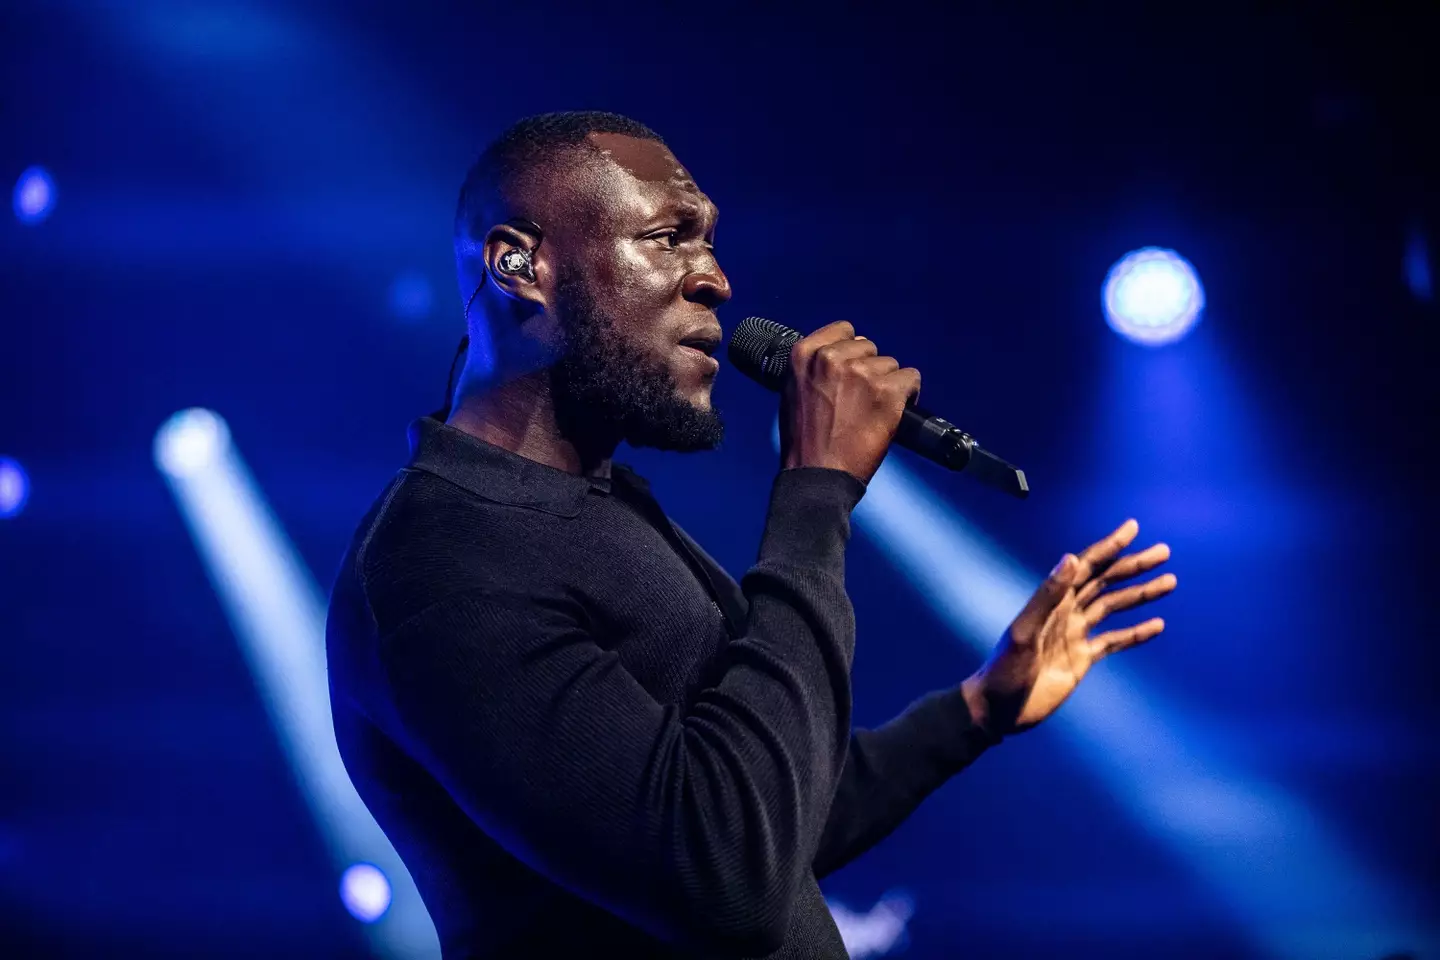 Fans think Stormzy defended Meghan Markle on new song 'Please'.